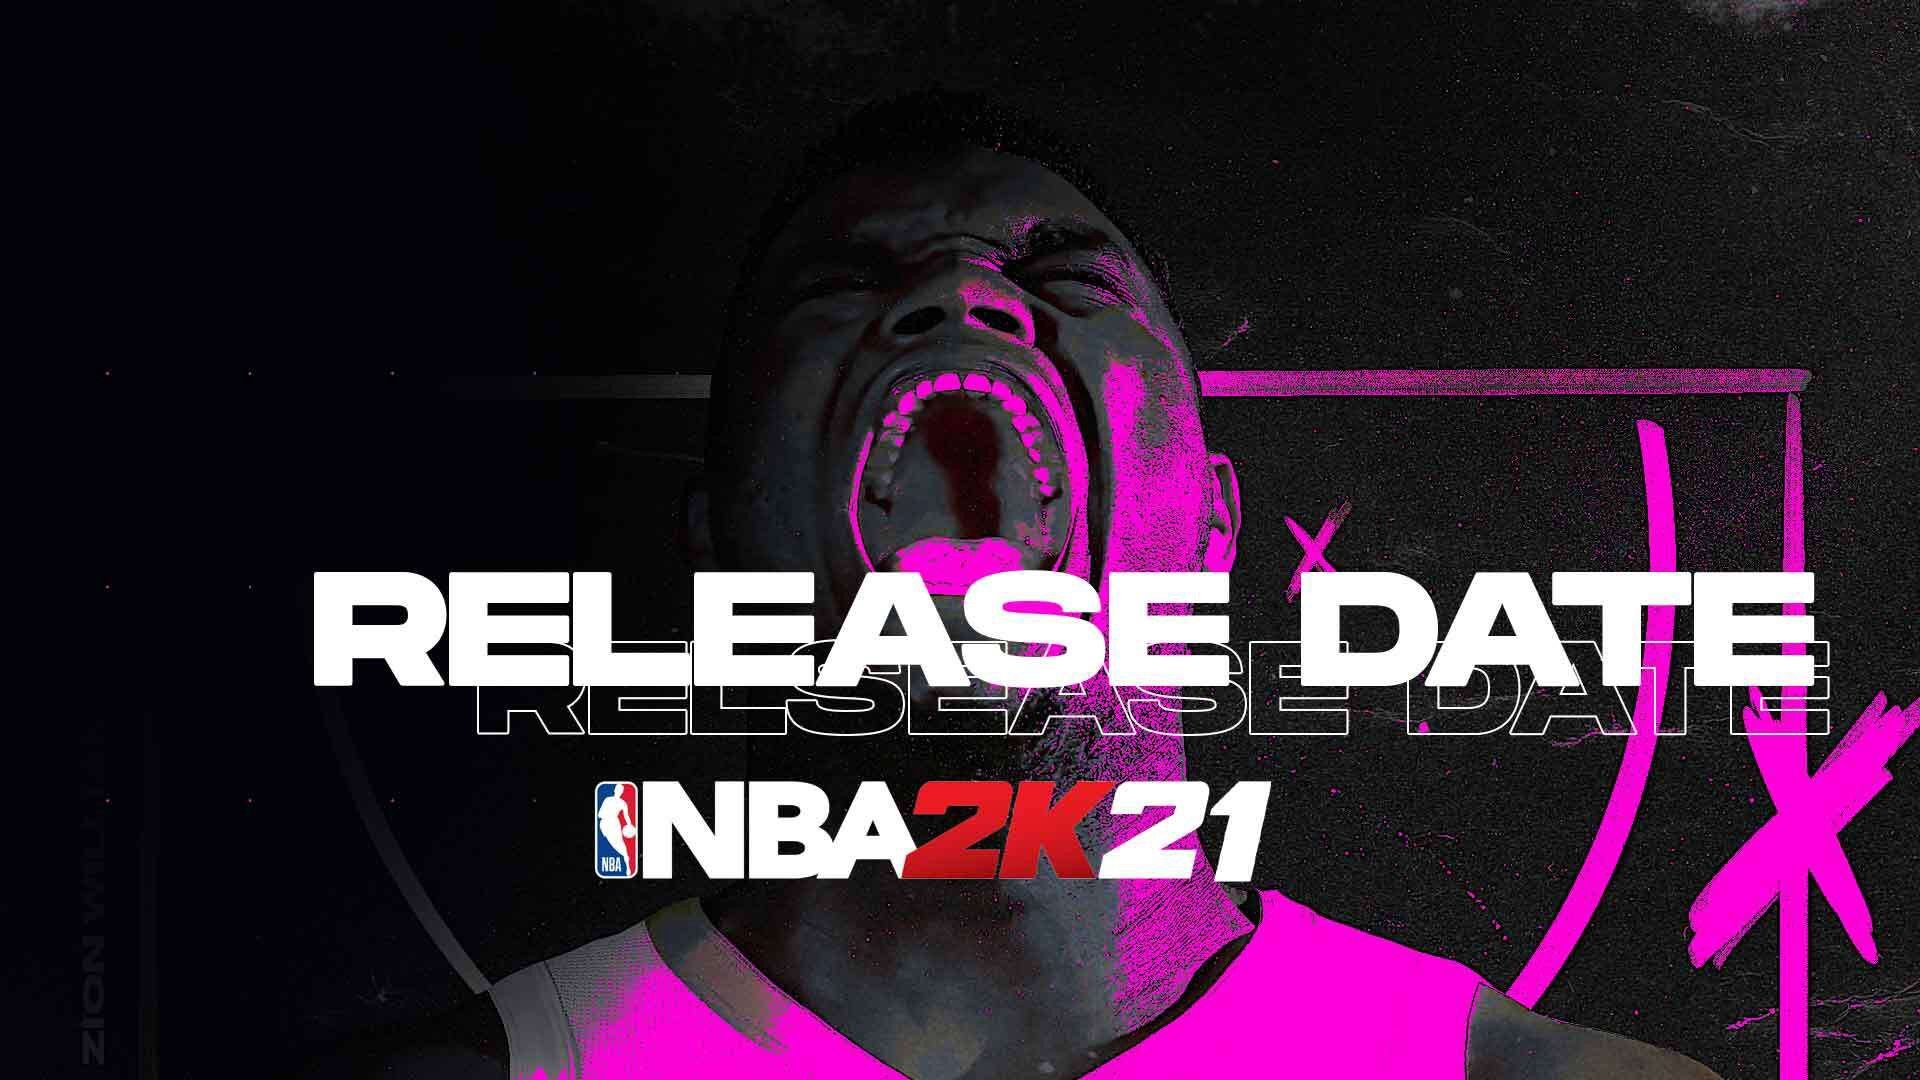 NBA 2K21 Trailer, Release Date, Cover Athlete, and More Preview Revealed